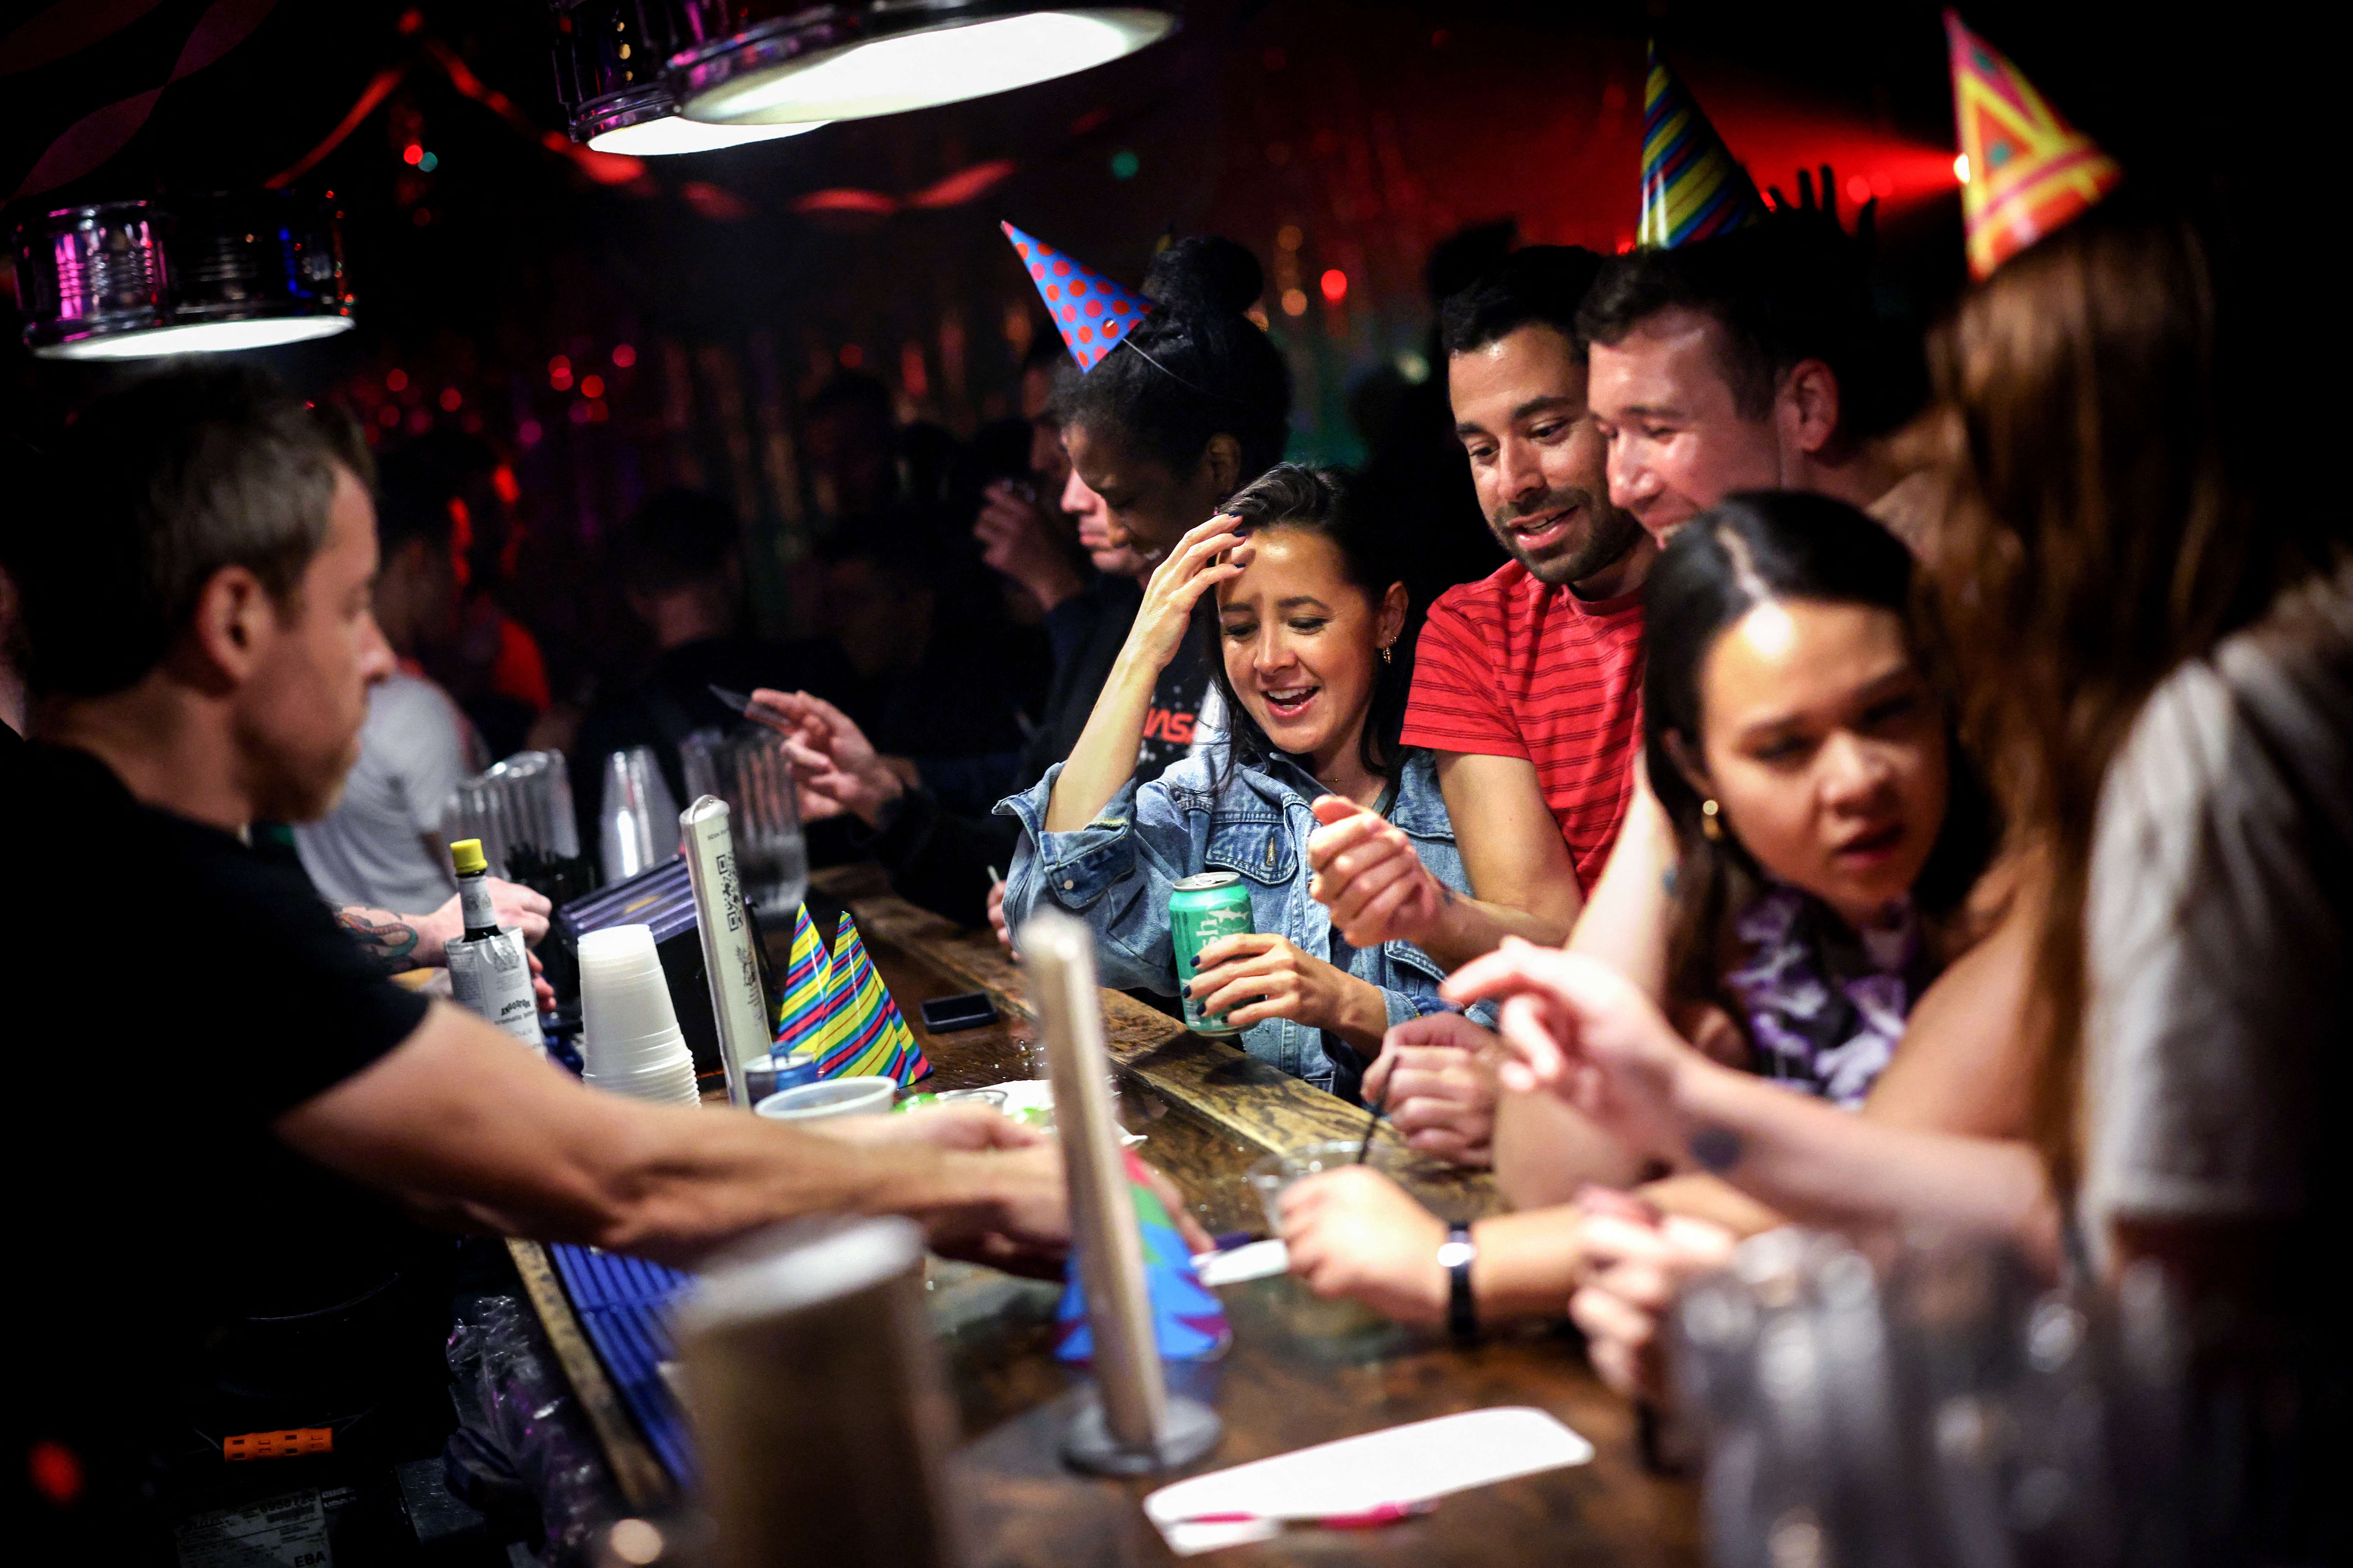 What UK student unions and clubs are doing to prevent drink spiking